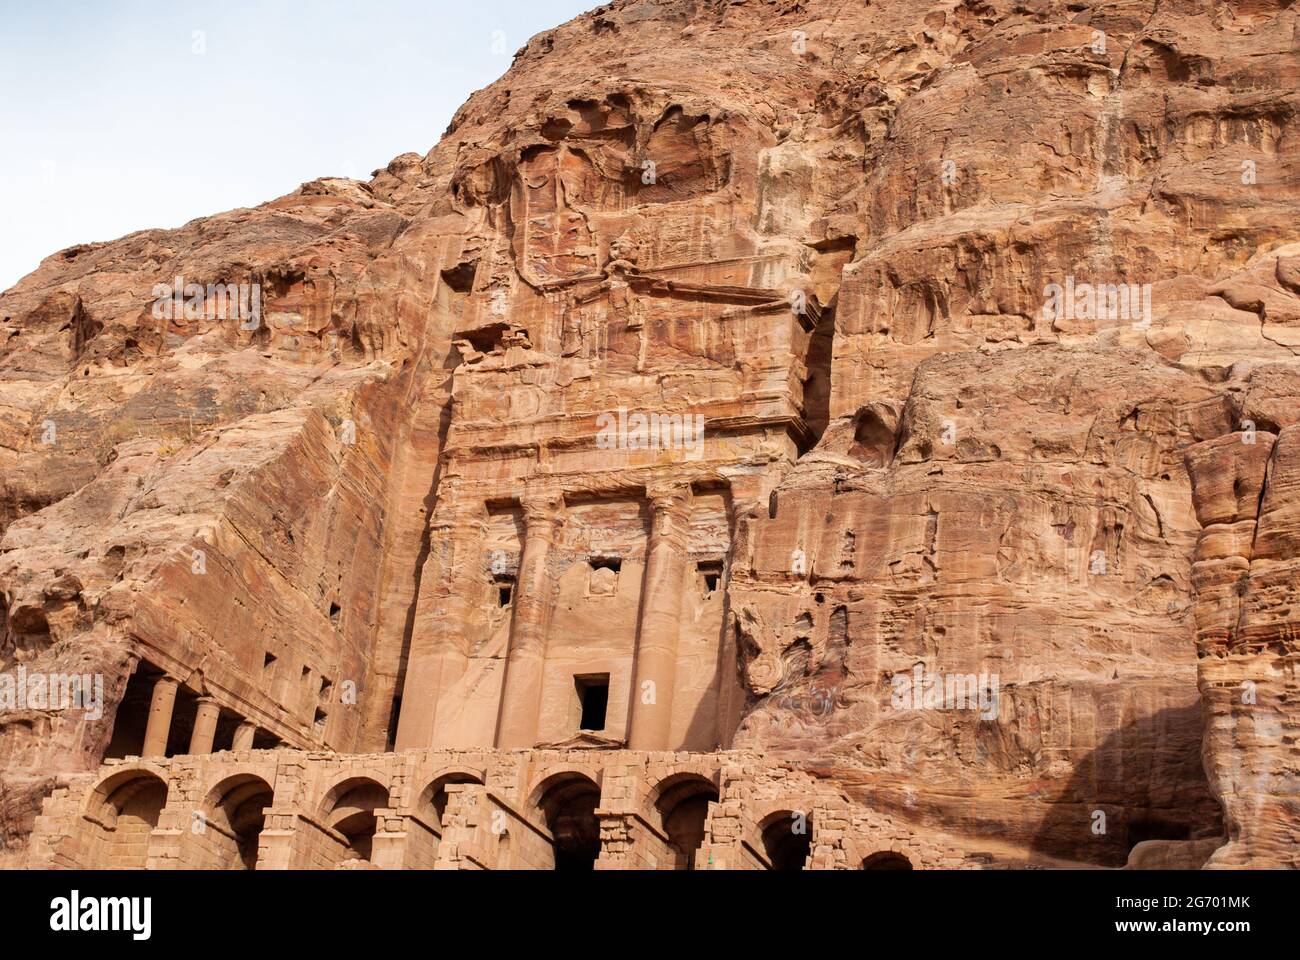 The ancient city of Petra in Jordan became one of the 7 New Wonders of the World. The city's carved rose-red sandstone rock facades, tombs, and temple Stock Photo